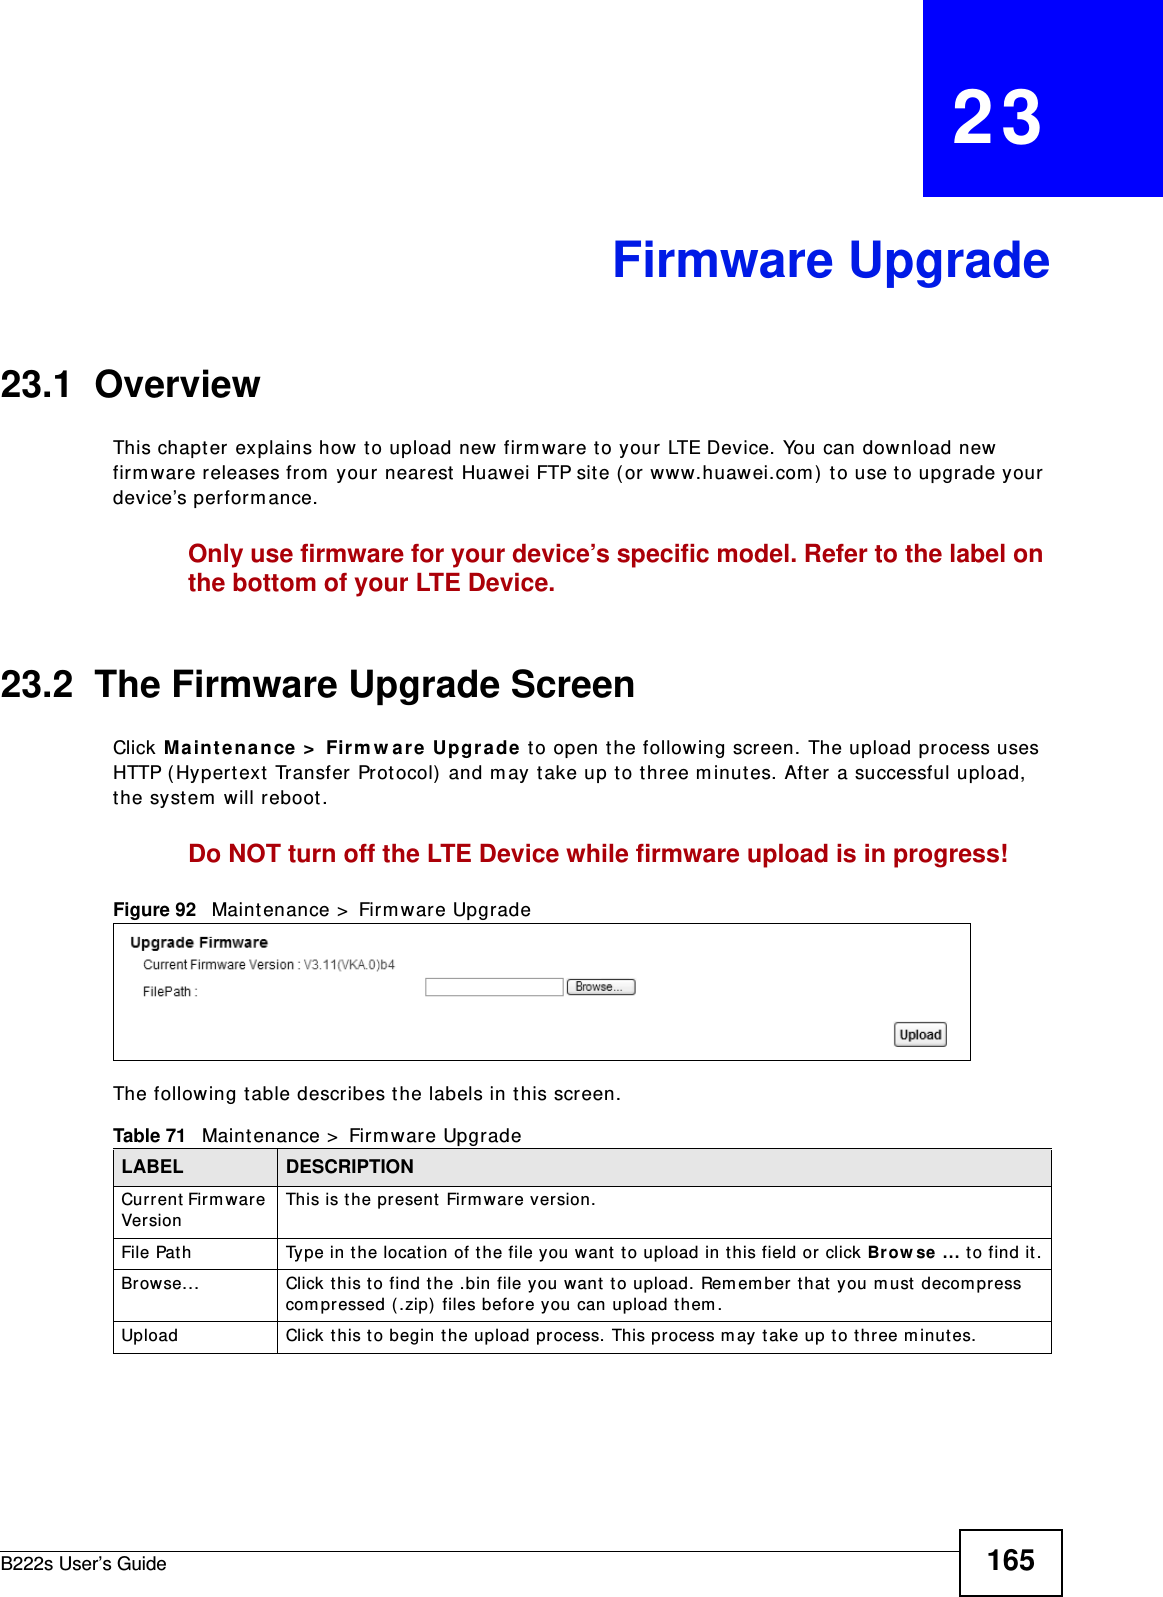 B222s User’s Guide 165CHAPTER   23Firmware Upgrade23.1  OverviewThis chapt er  explains how t o upload new firm ware t o your LTE Device. You can download new firm ware releases from  your nearest Huawei FTP site ( or www.huawei.com ) to use t o upgrade your device’s perform ance.Only use firmware for your device’s specific model. Refer to the label on the bottom of your LTE Device.23.2  The Firmware Upgrade ScreenClick M a int e nance &gt;  Firm w ar e  Upgra de to open the following screen. The upload process uses HTTP ( Hypert ext  Transfer Prot ocol) and m ay take up to t hree m inutes. Aft er a successful upload, the system  will reboot . Do NOT turn off the LTE Device while firmware upload is in progress!Figure 92   Maint enance &gt;  Firm war e UpgradeThe following t able describes t he labels in t his screen. Table 71   Maintenance &gt;  Firm ware UpgradeLABEL DESCRIPTIONCur ren t  Fir m war e Ve r sionThis is t he present Firm war e version. File Path Type in t he locat ion of the file you want t o upload in t his field or click Br ow se  ... to find it .Br owse...  Click t his t o find t he .bin file you want t o upload.  Rem em ber t hat you m ust  decom press com pressed (.zip)  files befor e you can upload t hem . Upload  Click t his to begin t he upload process. This process m ay t ake up t o t hree m inut es.